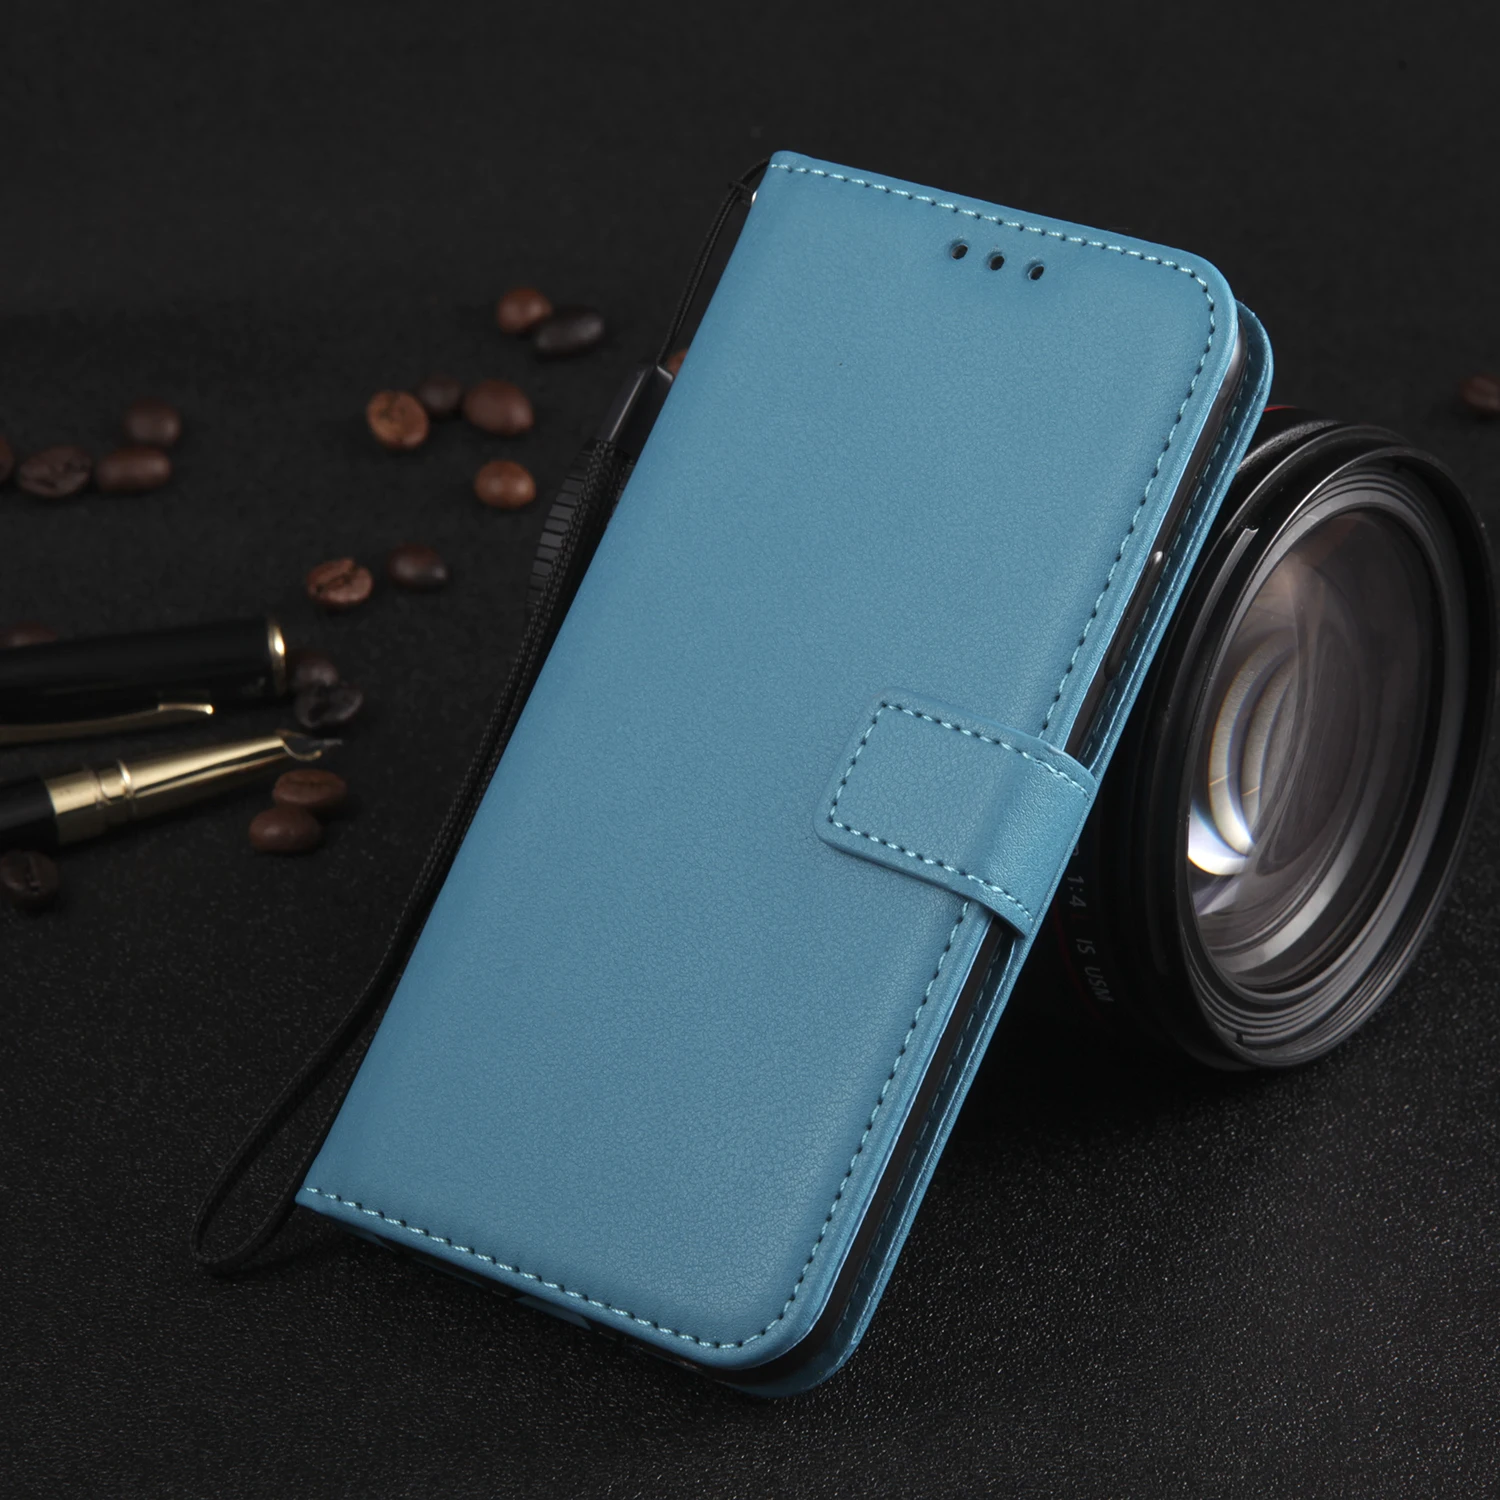 samsung silicone cover Leather Flip Wallet Case For Samsung Galaxy A10 A12 A20e A31 A02s A40 A41 A50 A51 A52 A70 A71 A21s A3 A5 A6 A7 A8 Protect Cover kawaii samsung phone cases